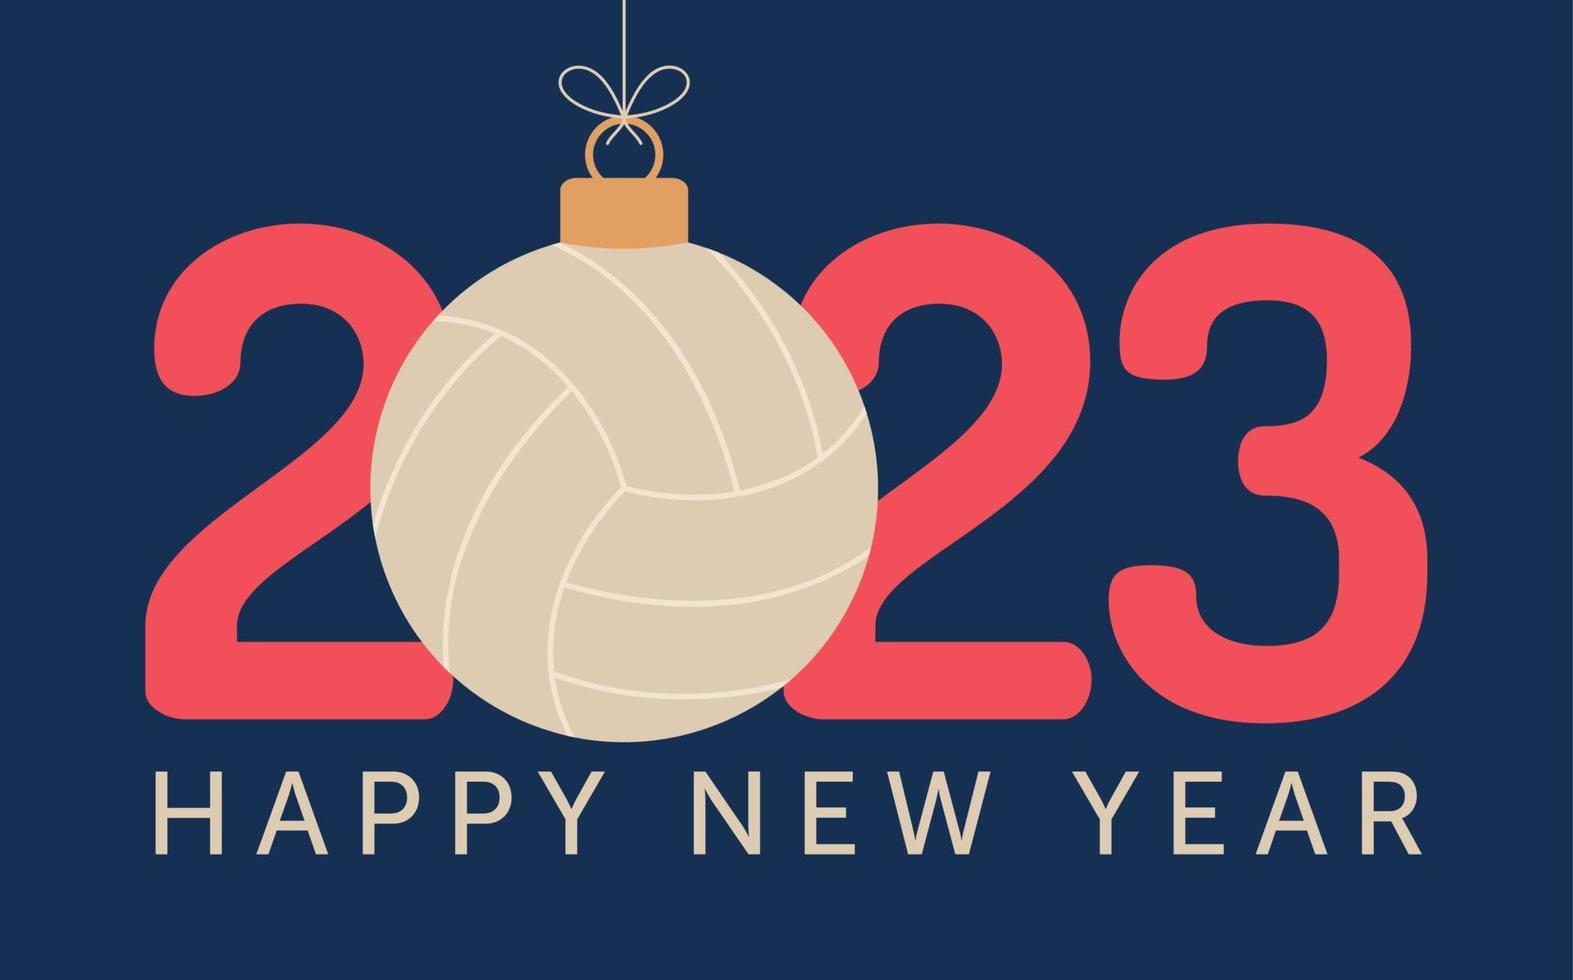 Volleyball 2023 Happy New Year. Sports greeting card with volleyball ball on the flat background. Vector illustration.